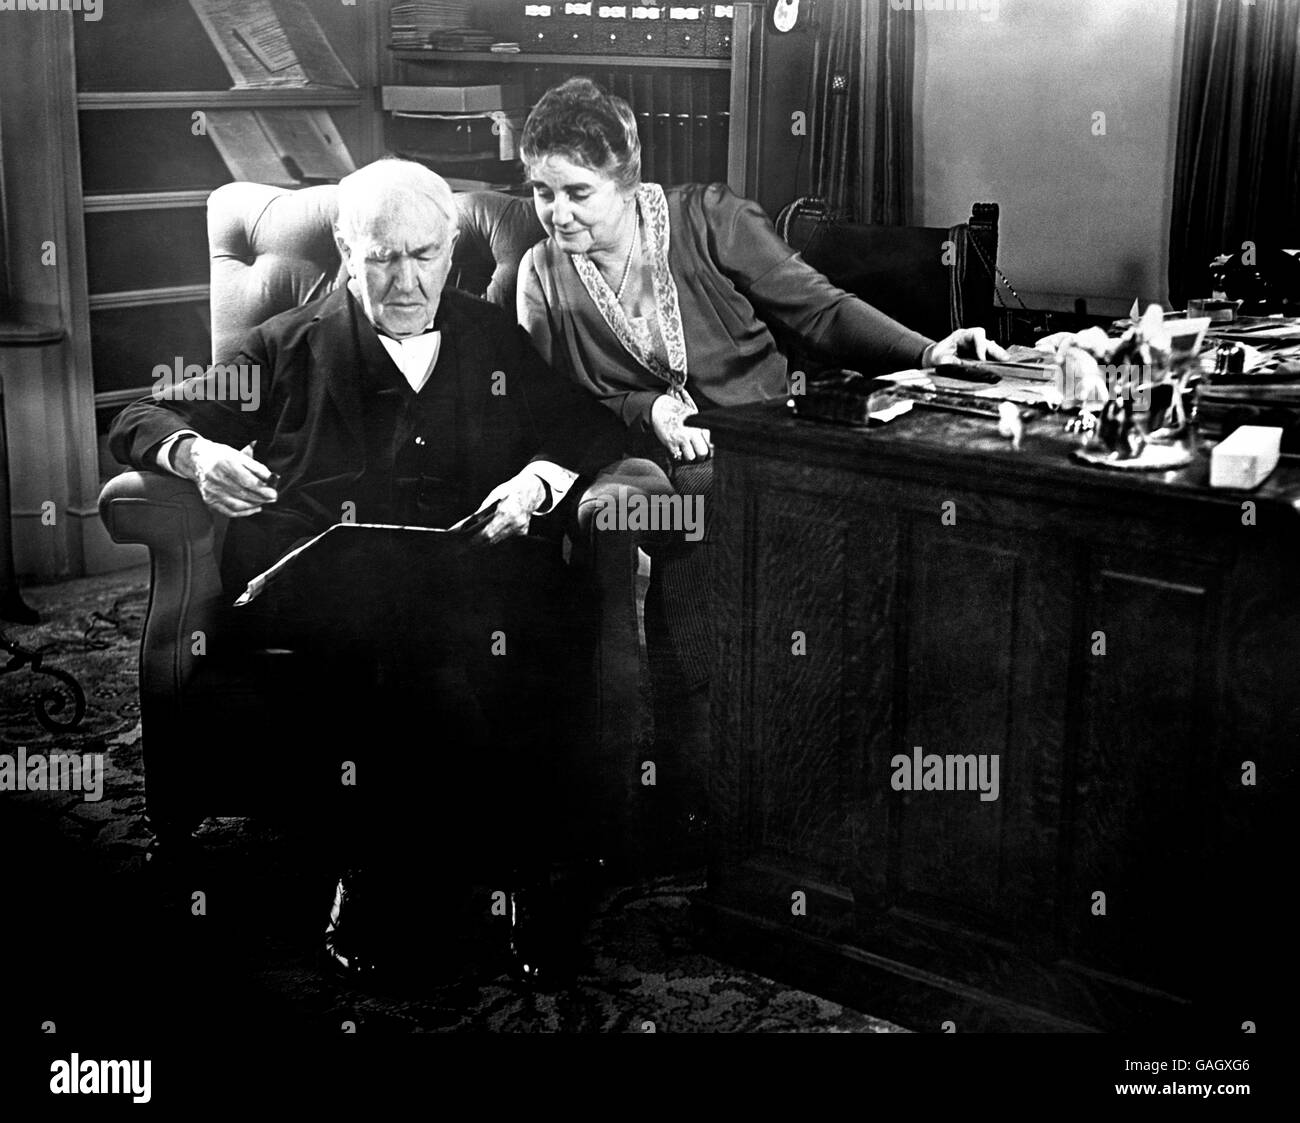 Mr and Mrs Thomas Edison photographed in their home in East Orange, a short time before the serious illness of Mr Edison. This picture is almost undoubtedly thr last one ever taken of the world famous inventor before he died. Stock Photo